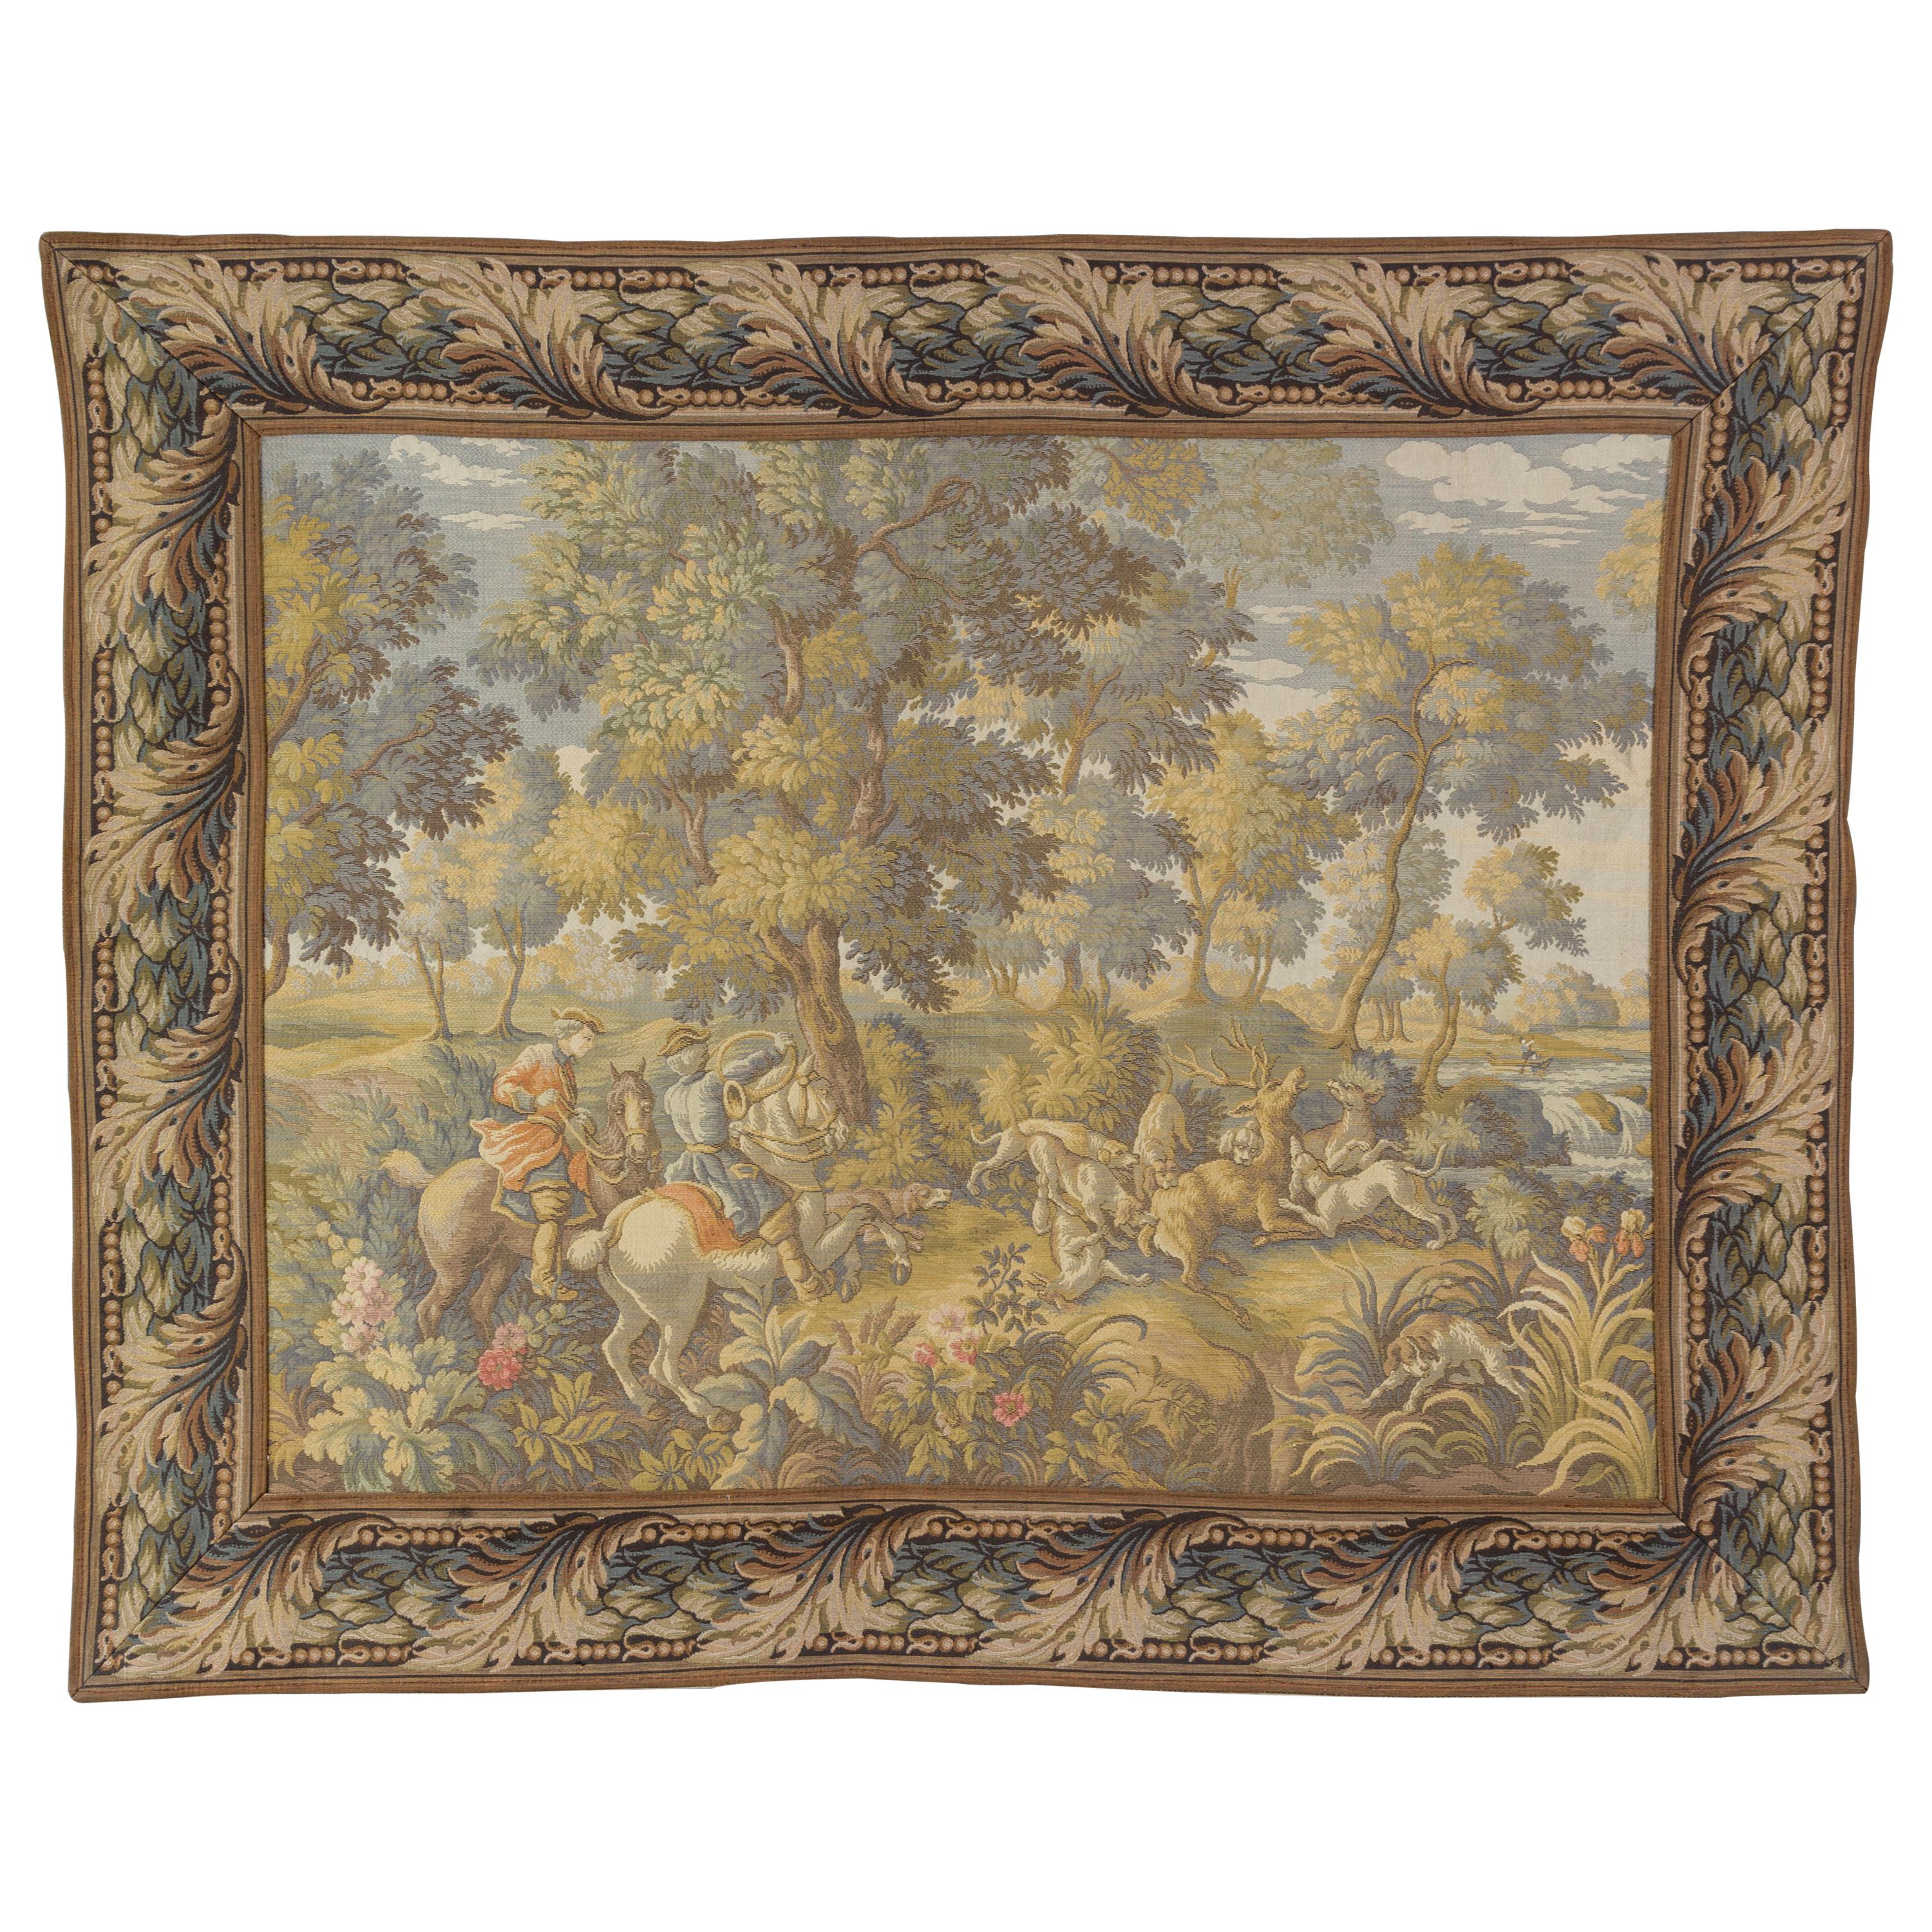 French Tapestry of Hunt Scene with Hounds and Deer